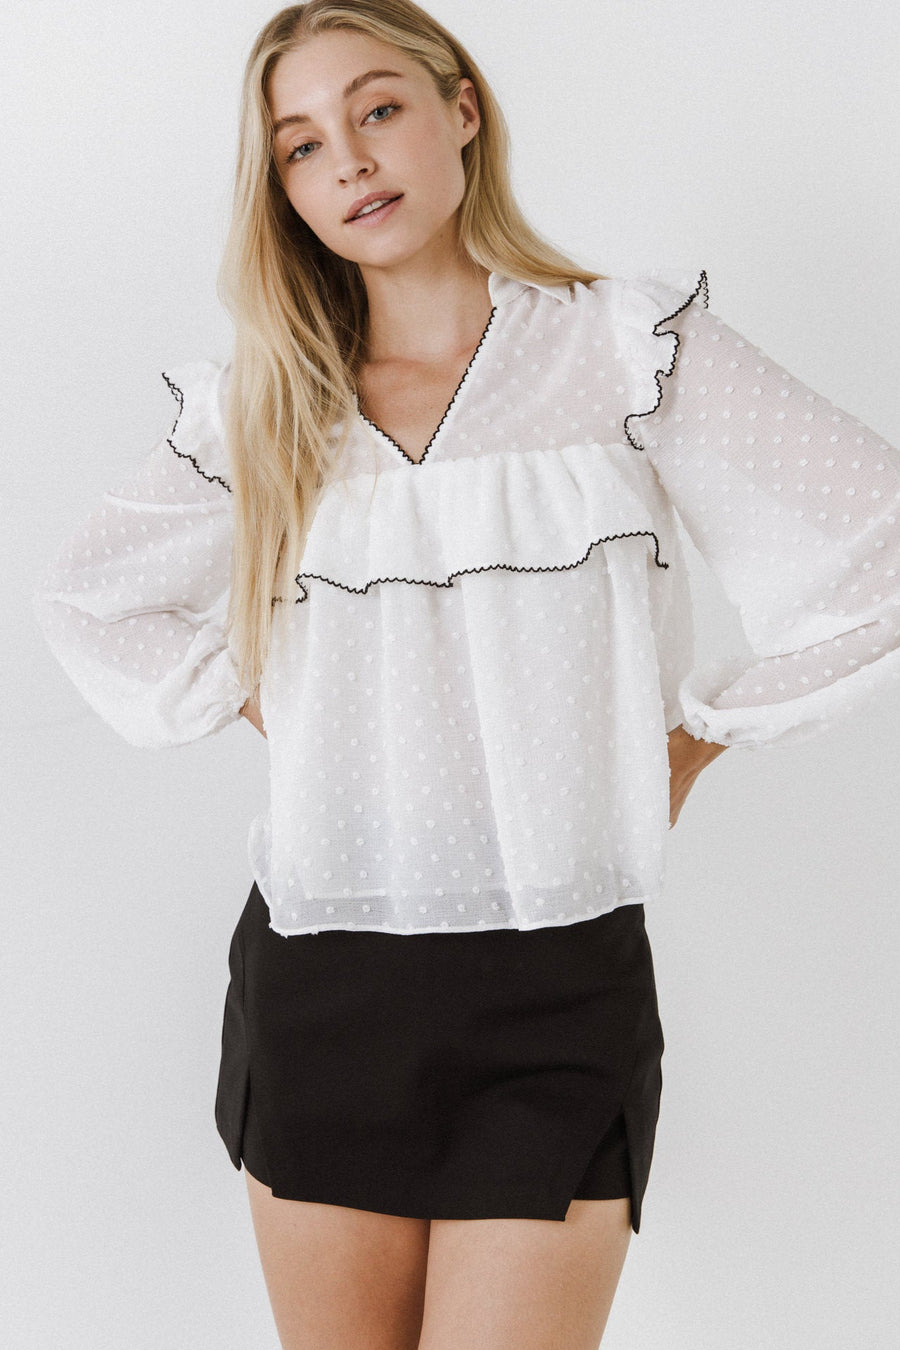 FREE THE ROSES-Swiss Dot Blouse with Ruffle Detail-SHIRTS & BLOUSES available at Objectrare